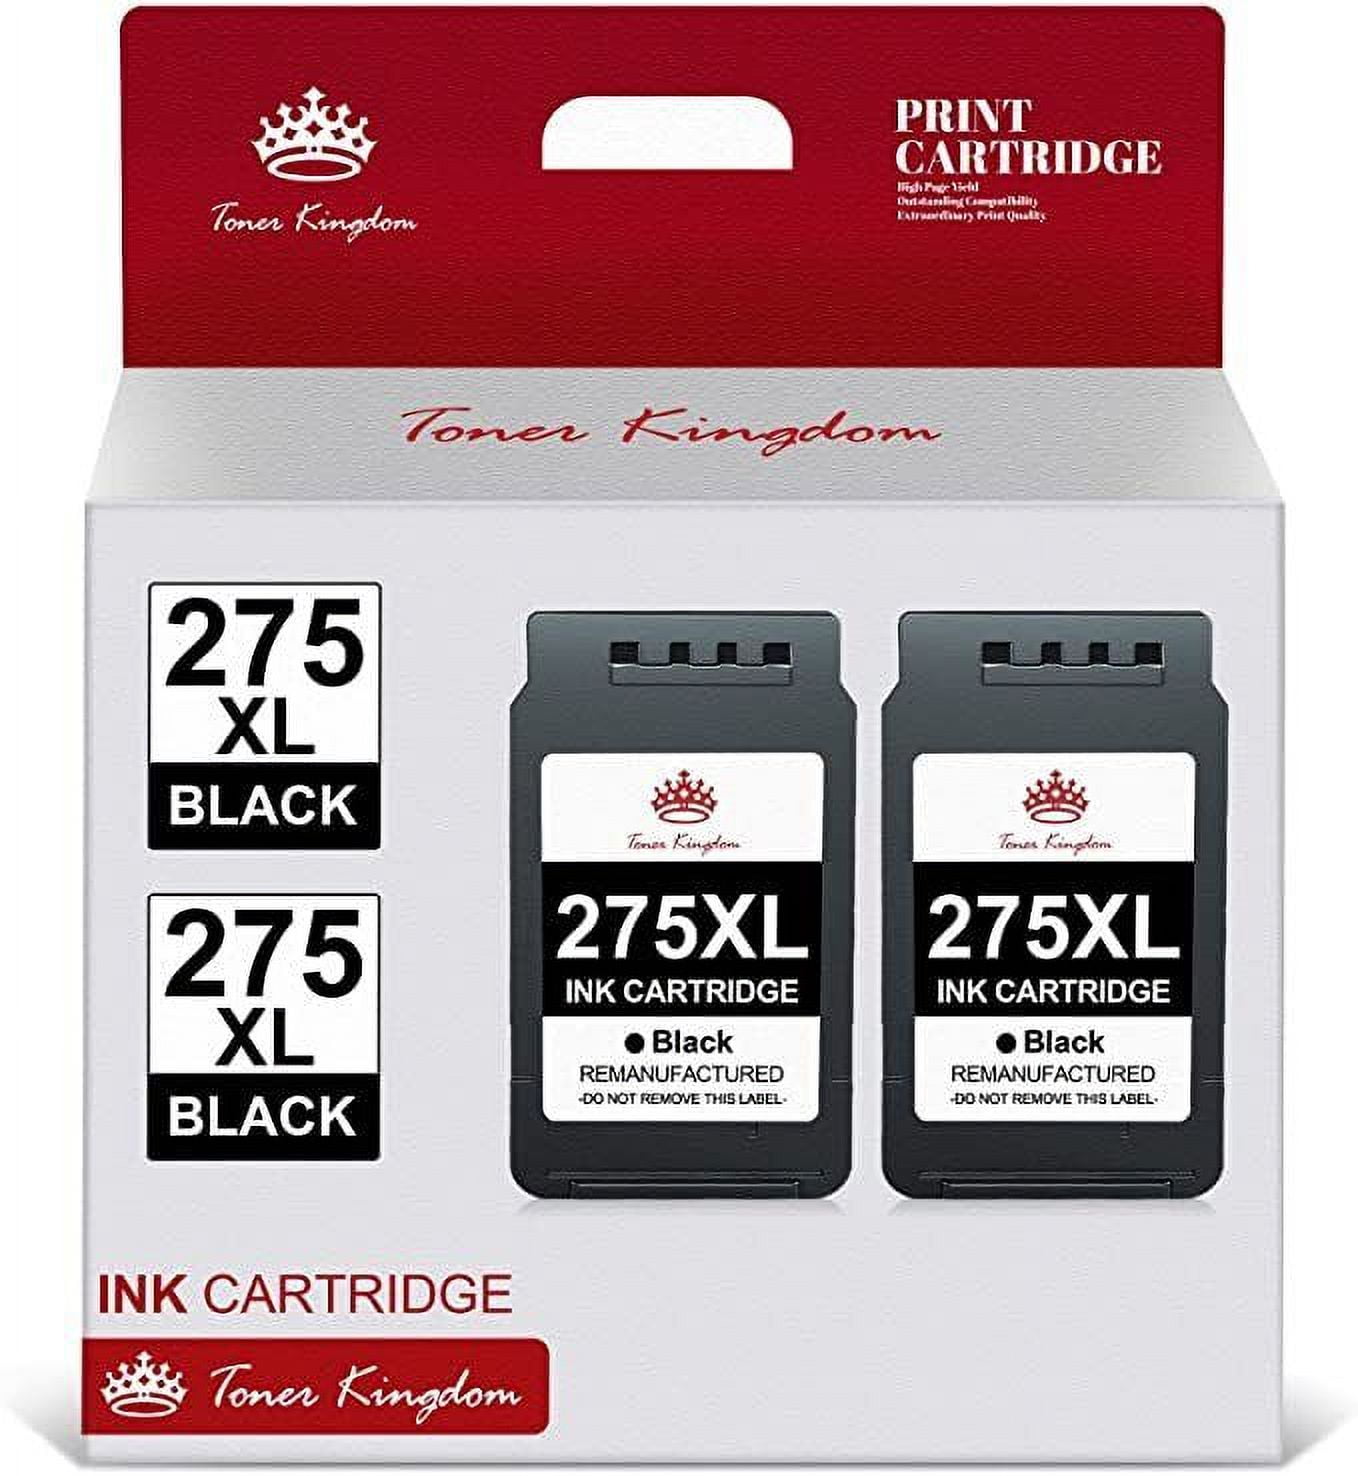 Toner Kingdom PG 275 XL Ink Cartridges Replacement for Canon Ink 275 for Canon  Printers PIXMA TS3520 TS3522 TS3500 TR4720 TR4722 TR4700(2 Black) 